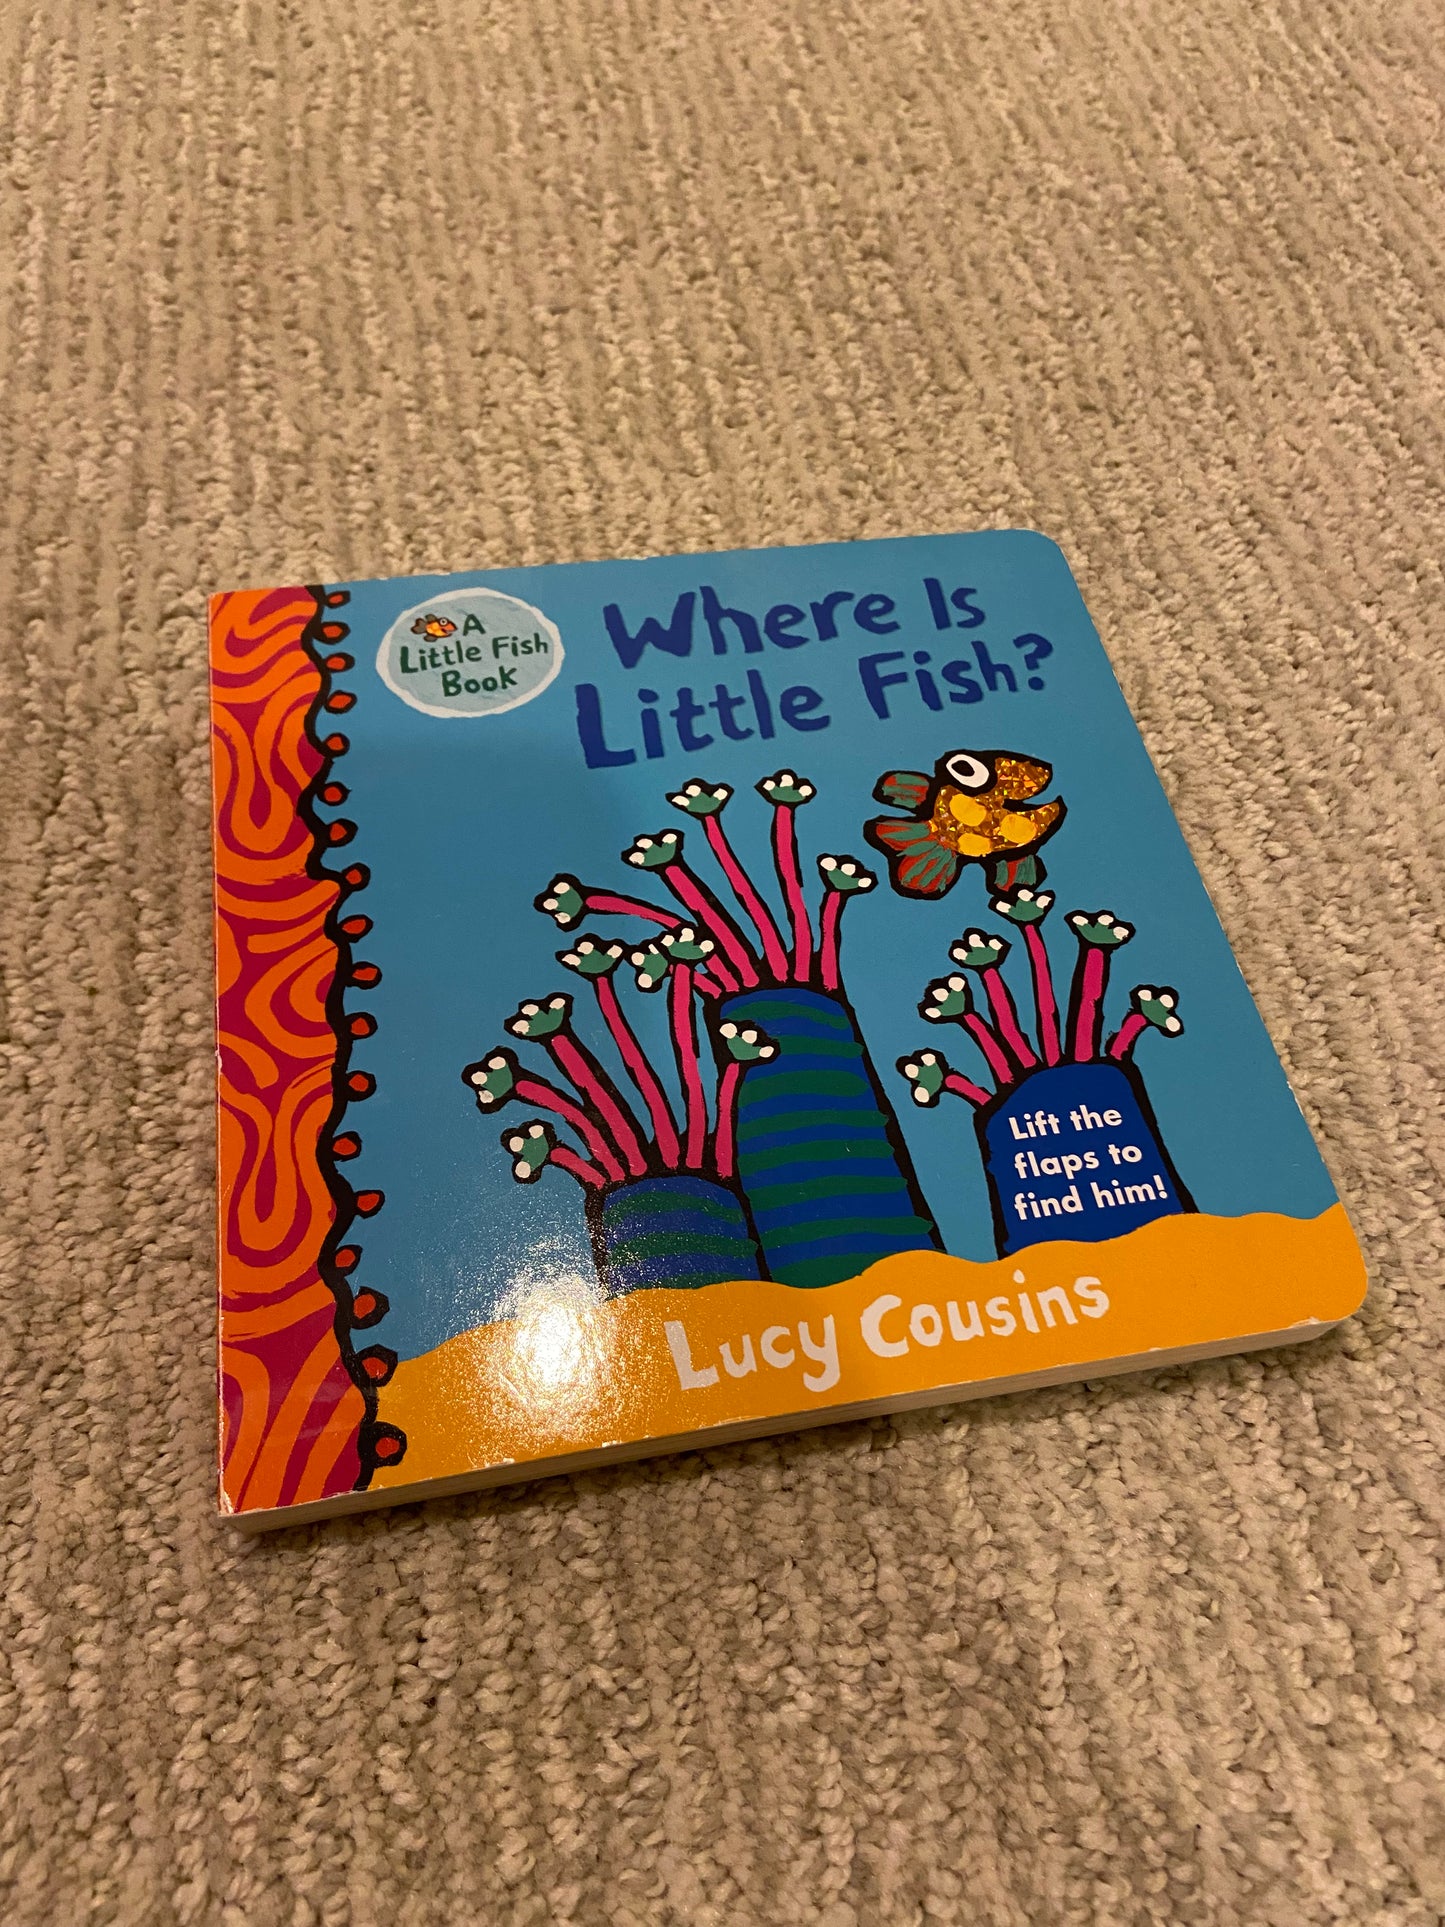 Where is Little Fish?